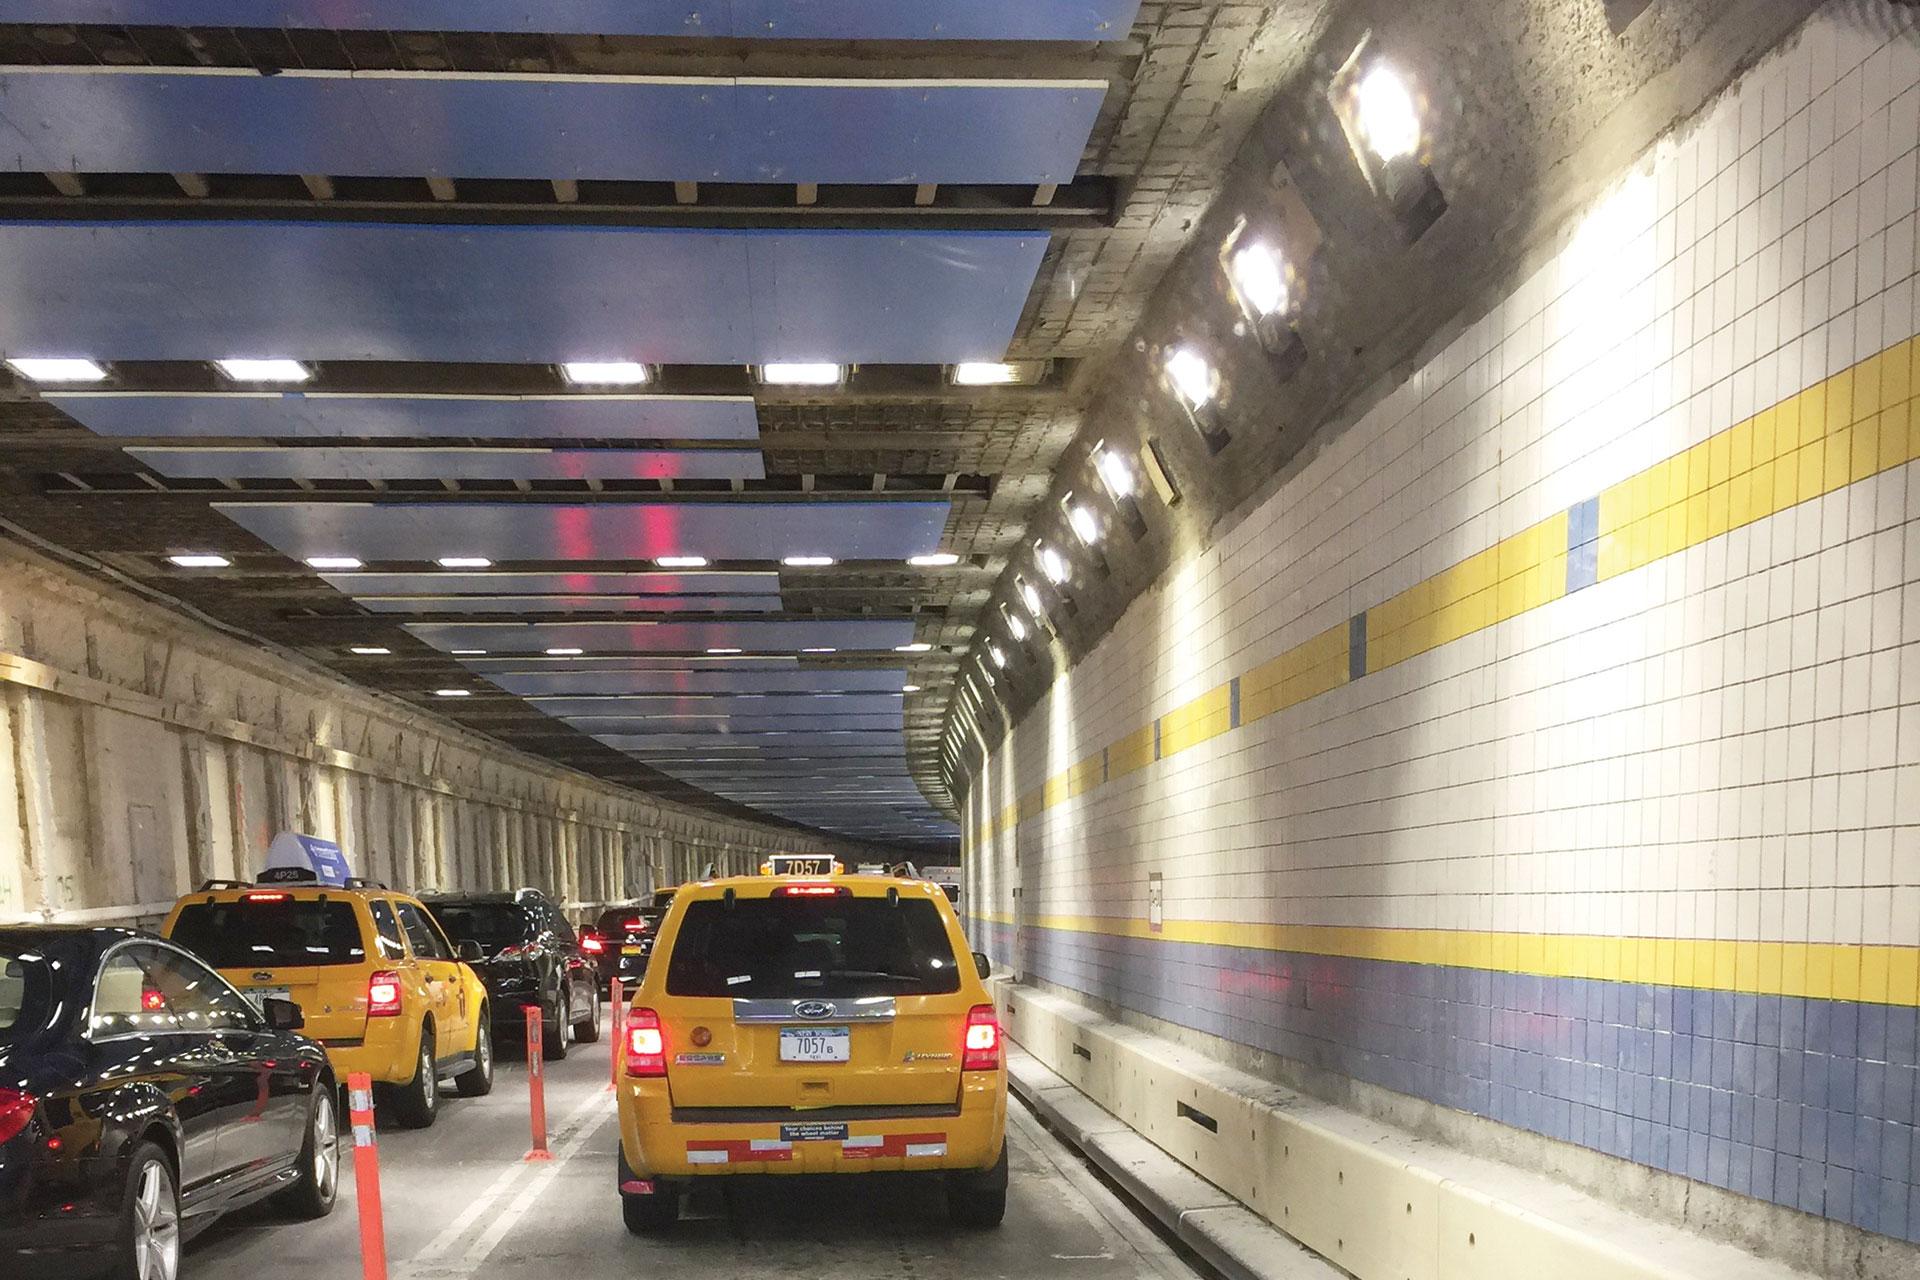 Energy-efficient-tunnel-LED-luminaires-by-Schréder-guarantee-safety-in-Queens-MidTown-Tunnel